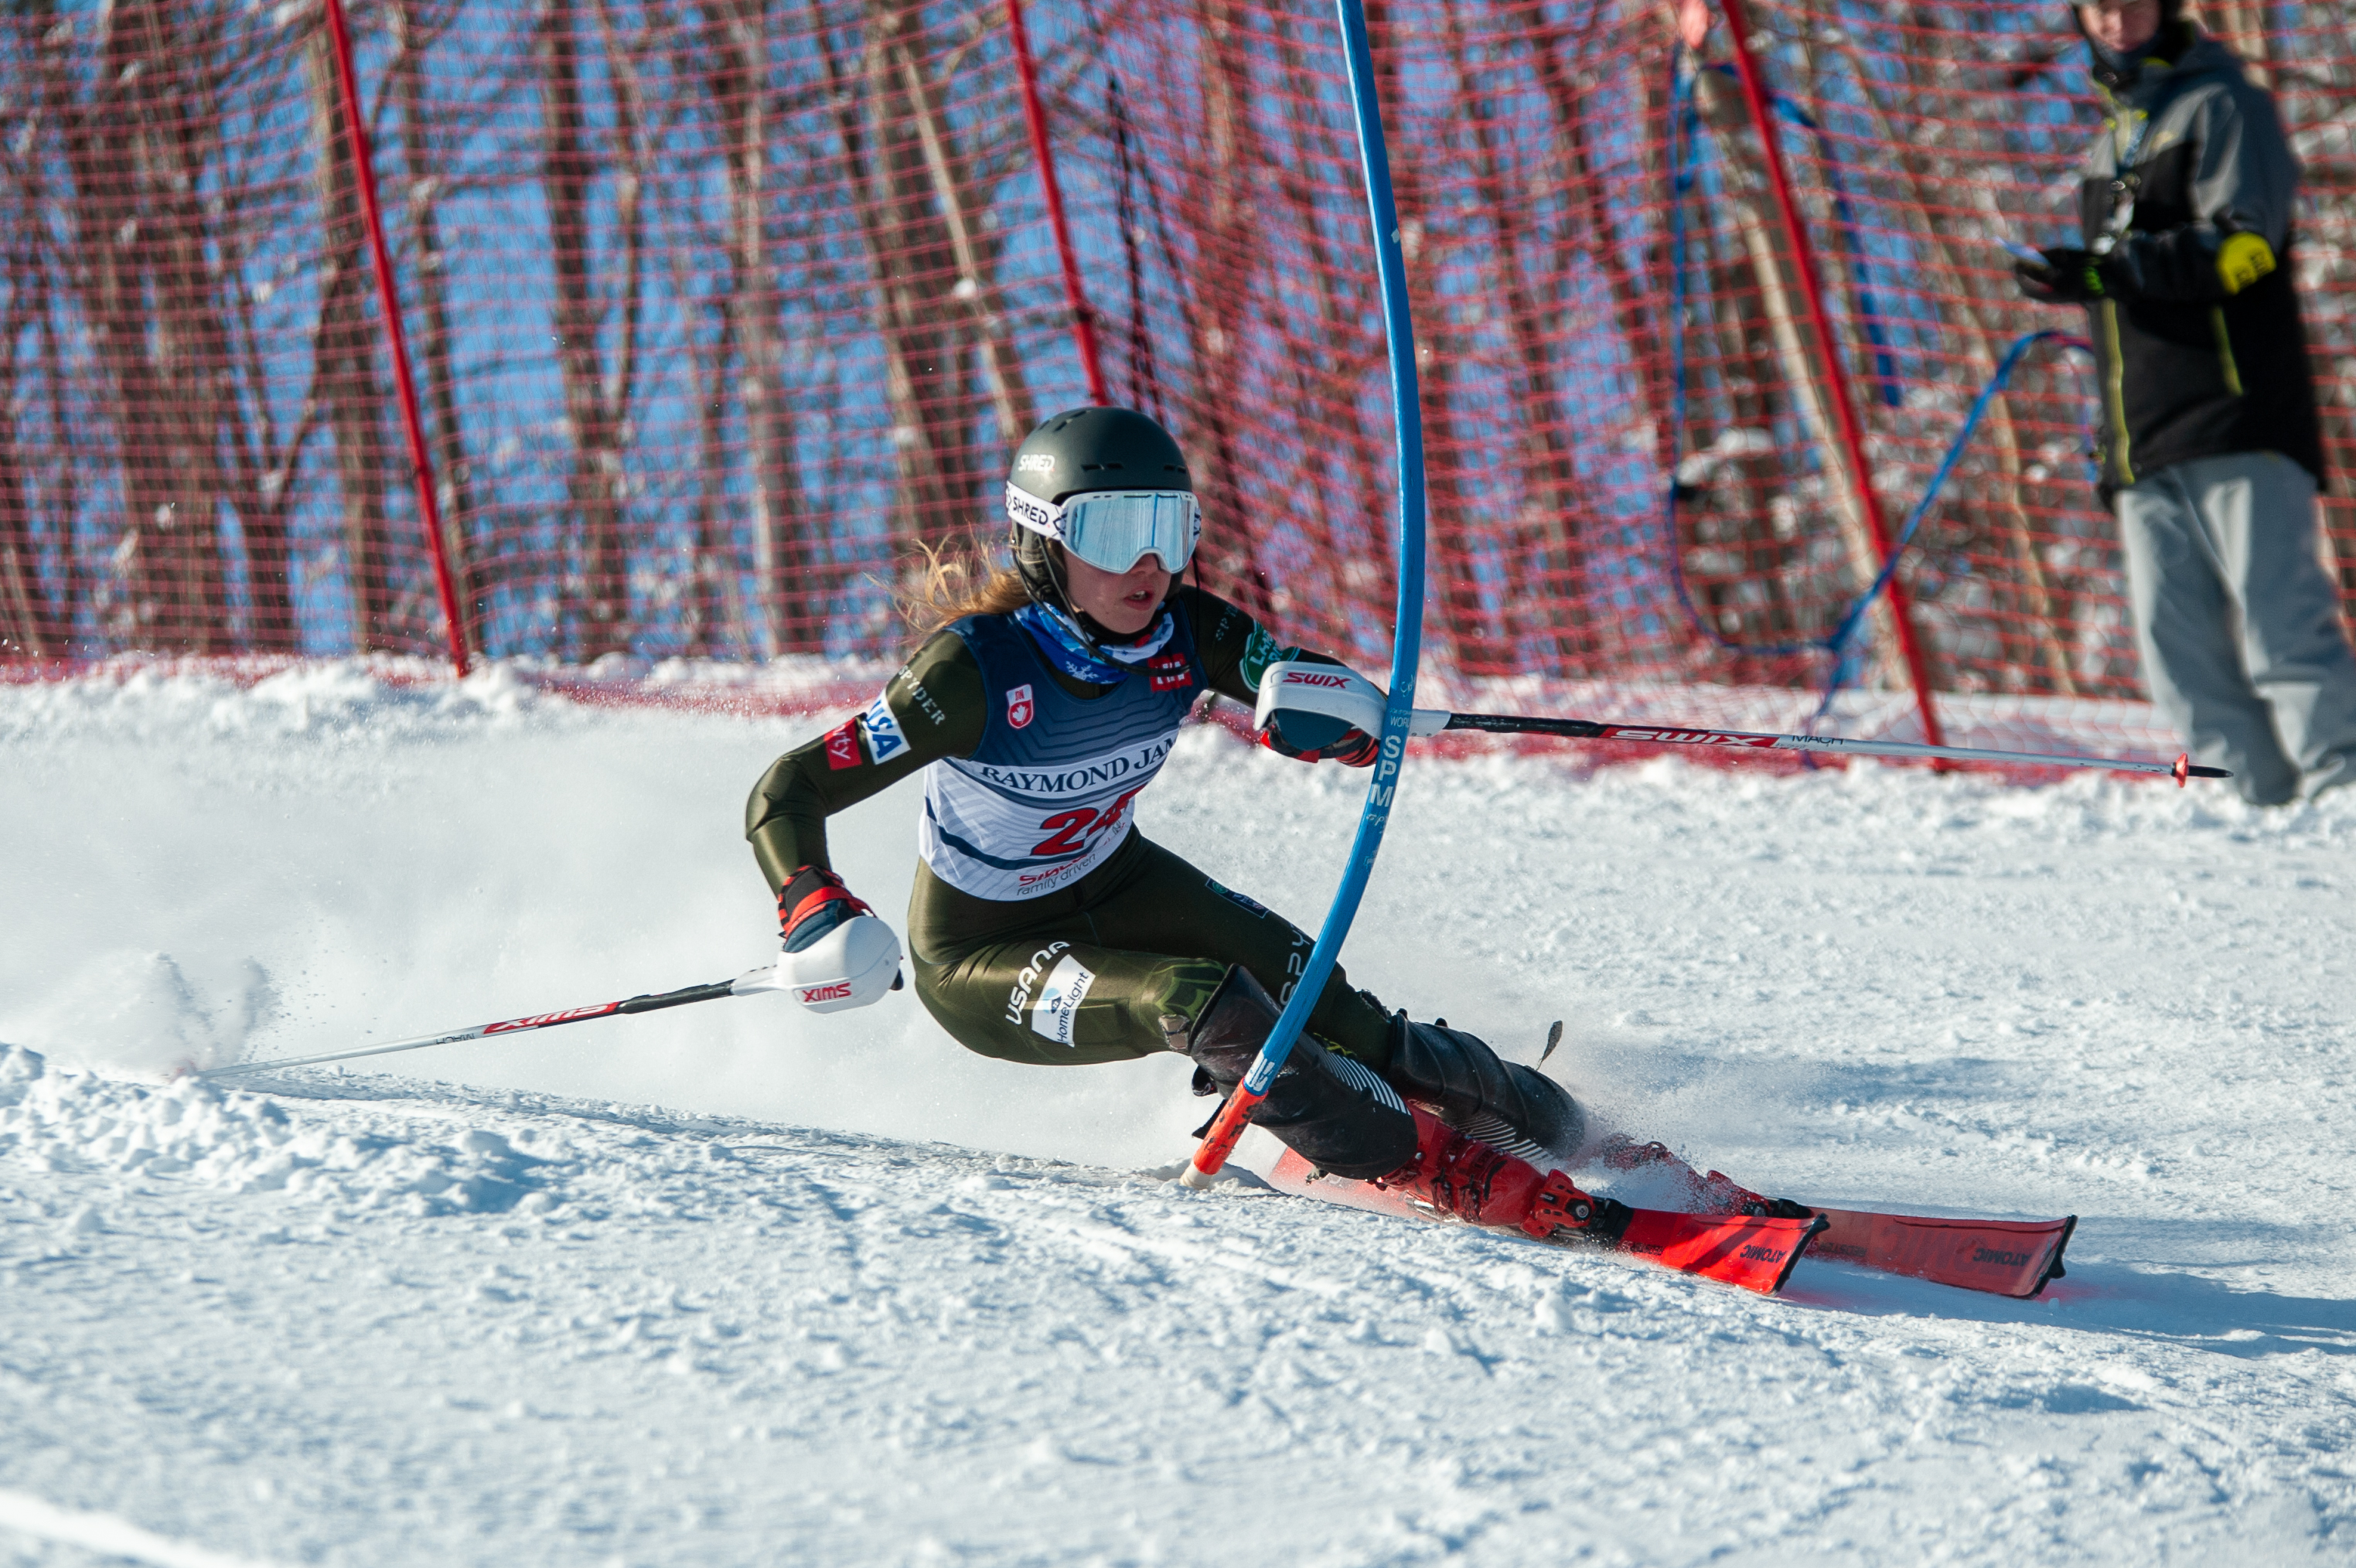 Proffit&#39;s Unlikely Path to U.S. Alpine Ski Team Featured in St. Louis Post-Dispatch